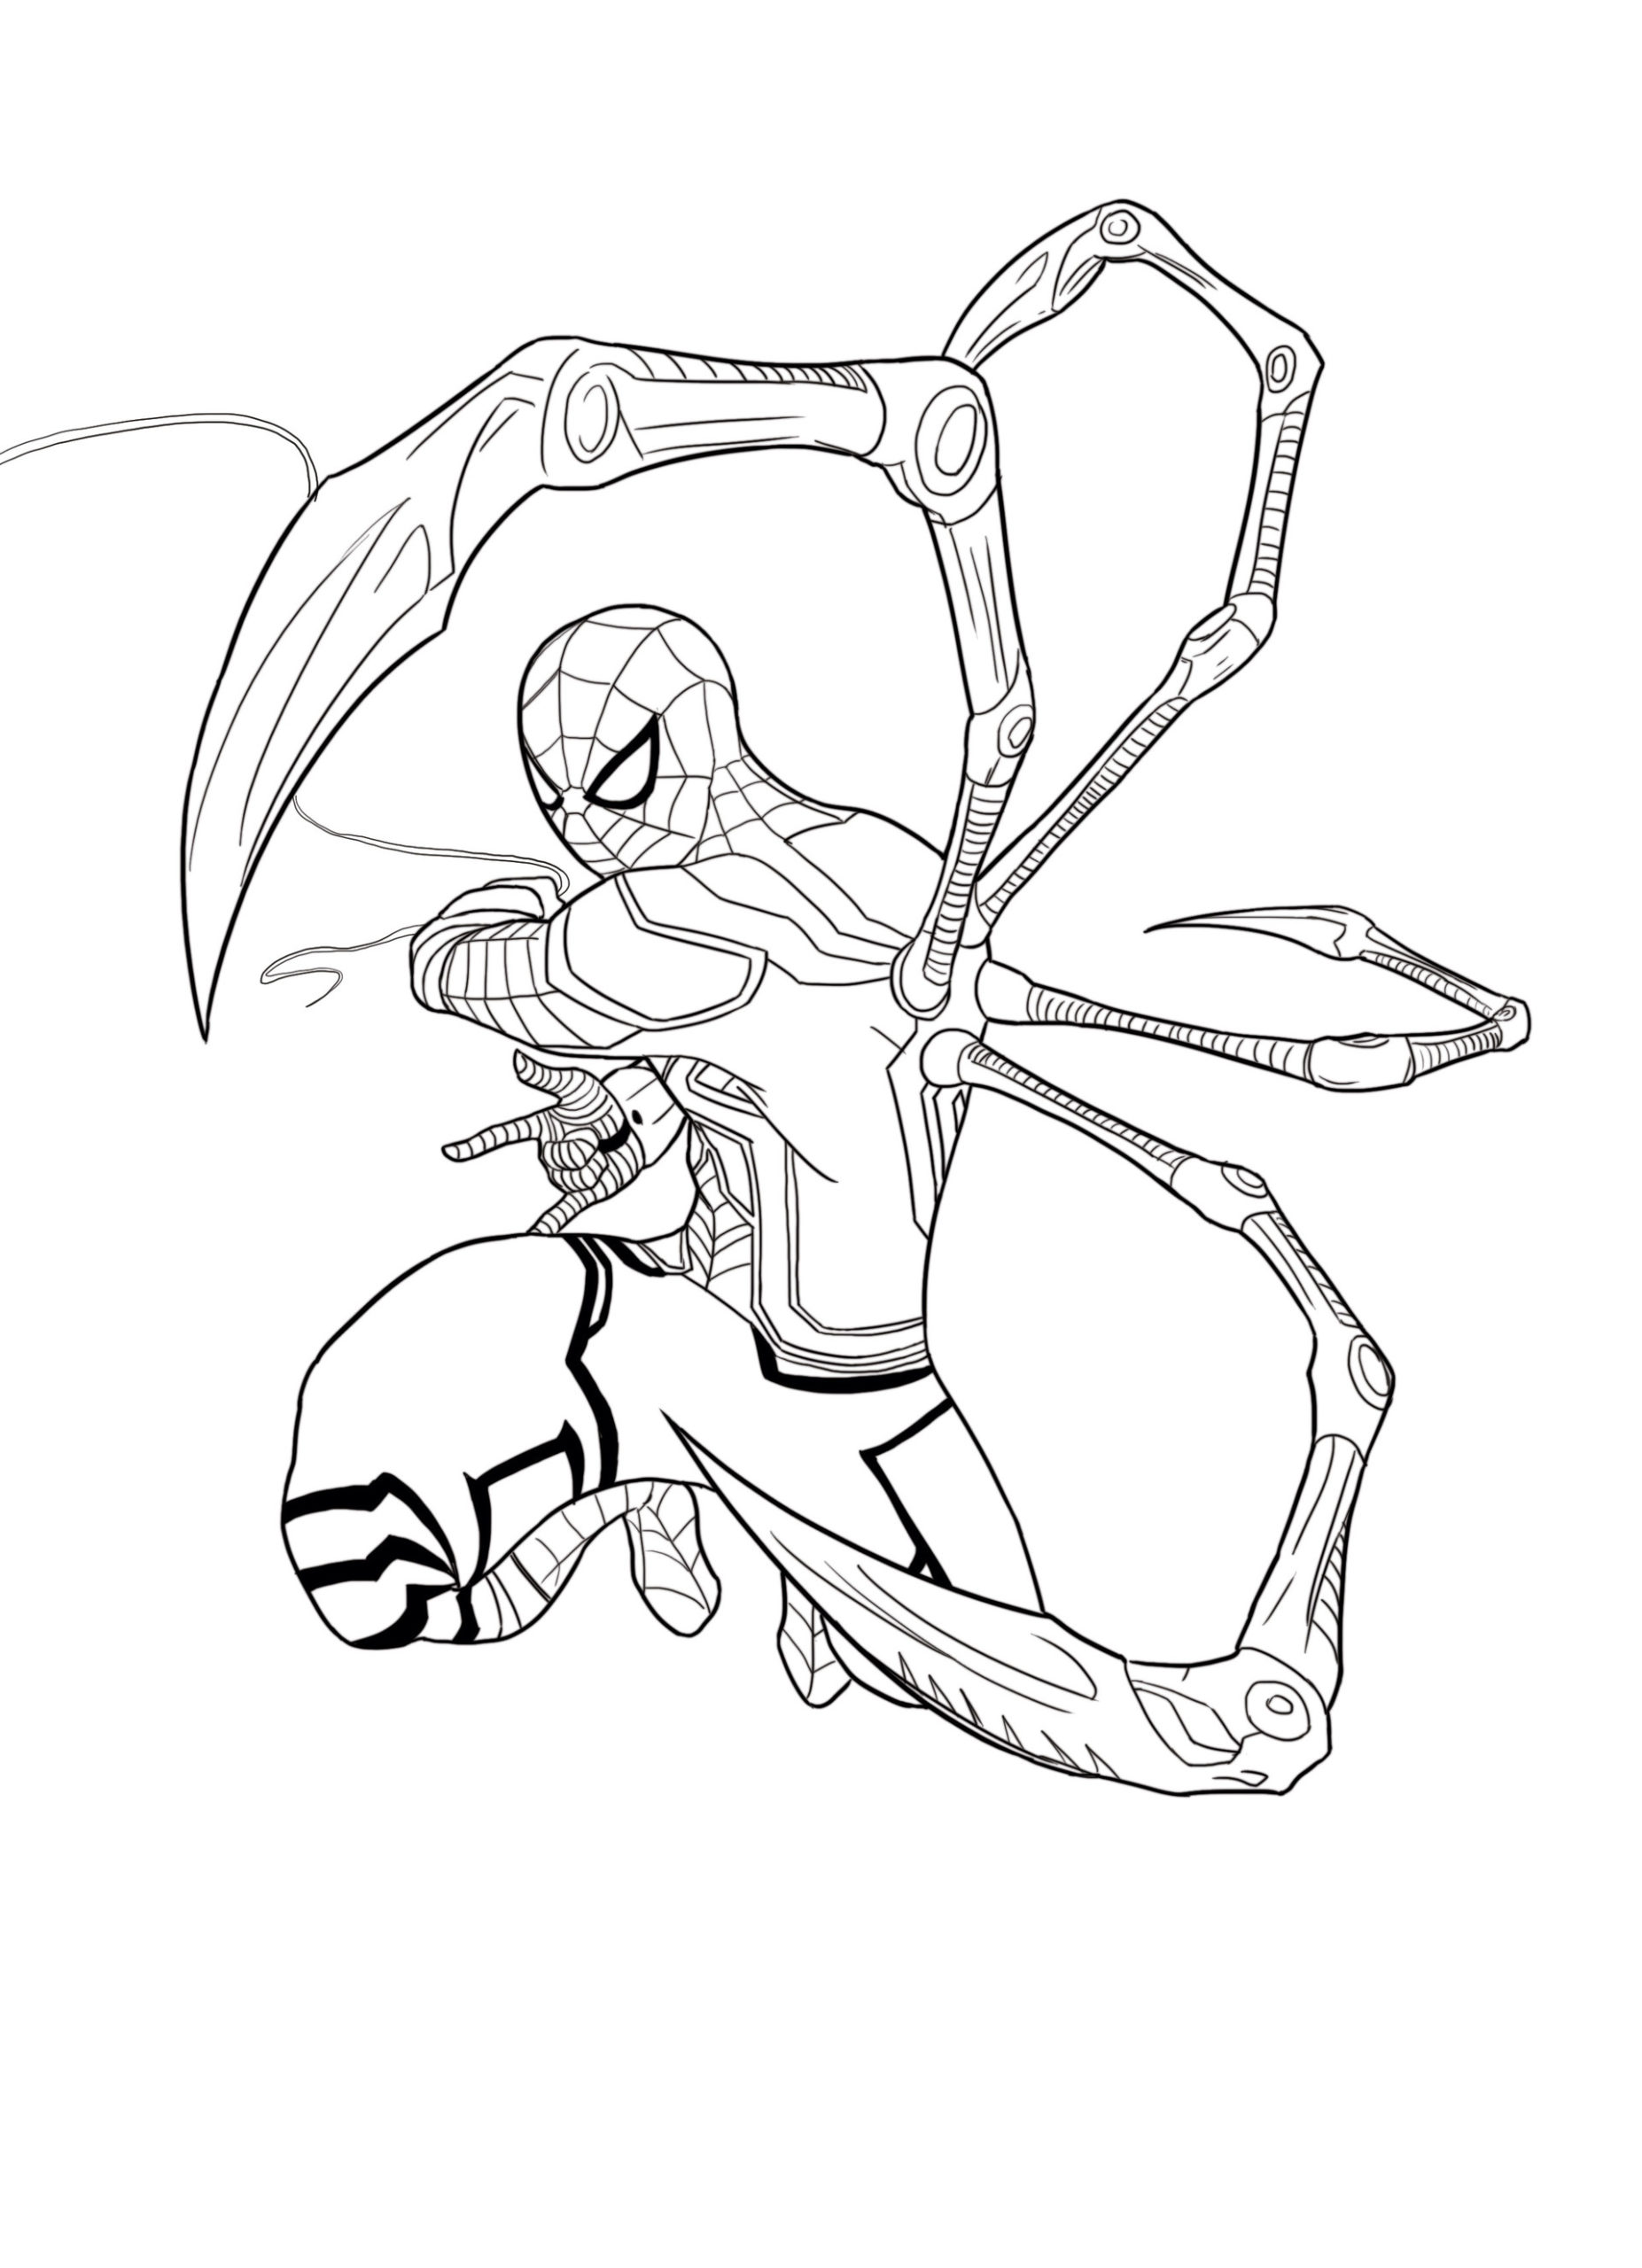 Iron Spider Man Coloring Pages - Coloring Home